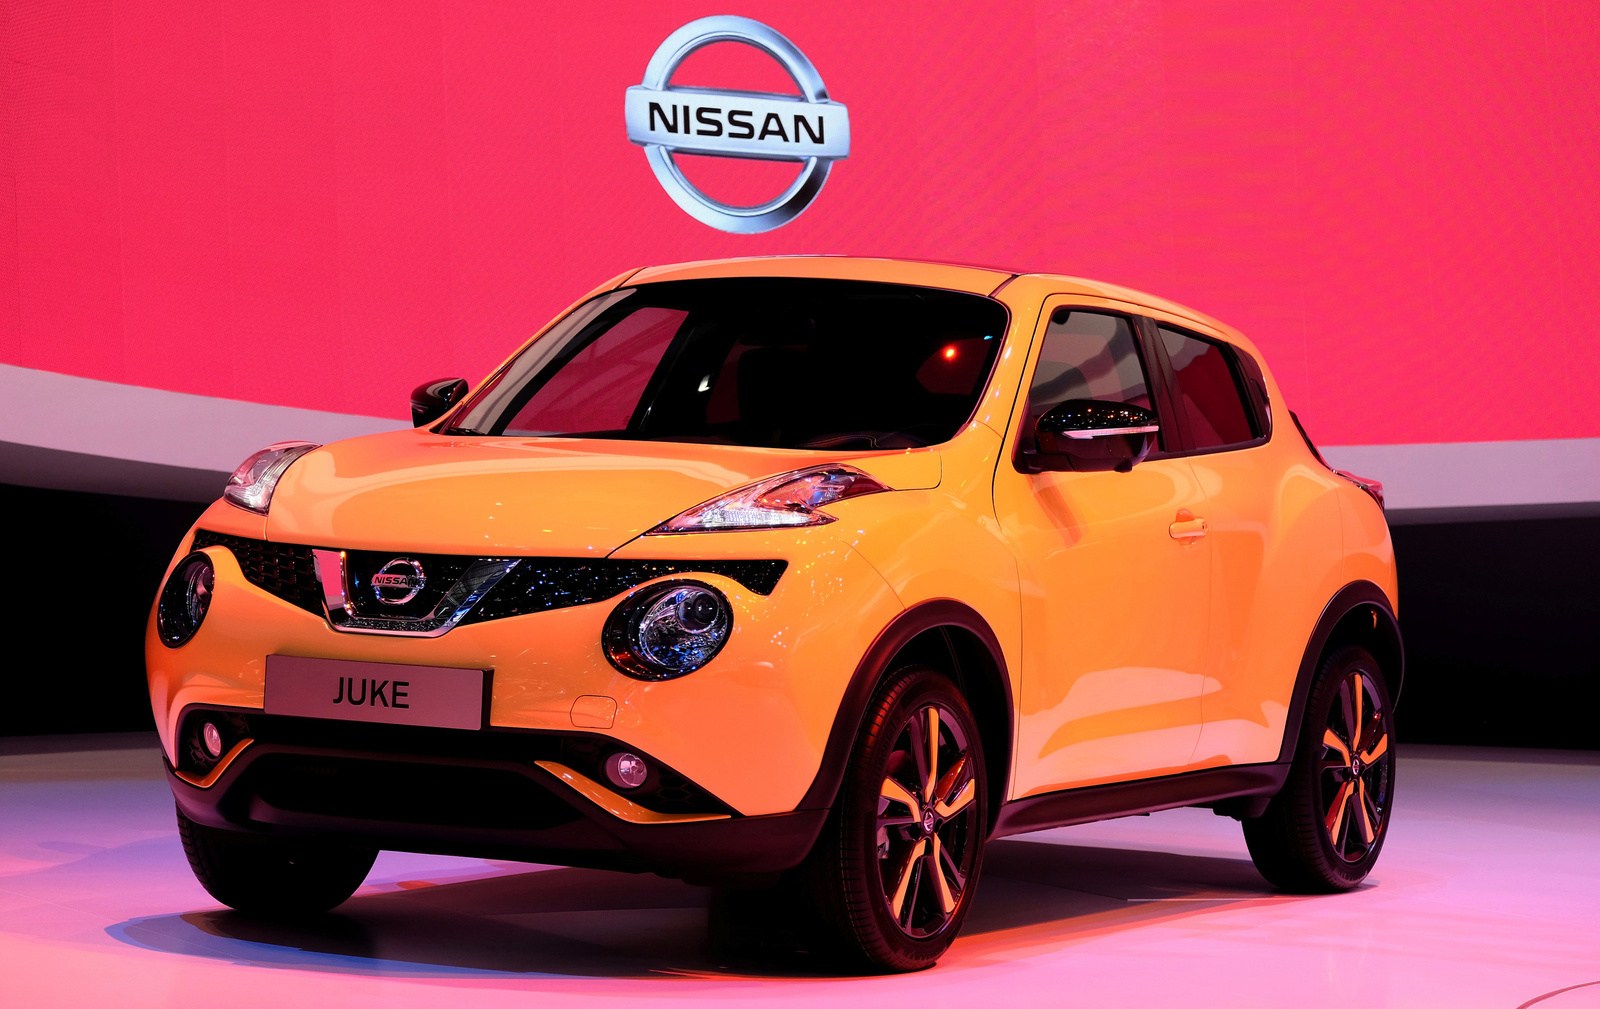 2015 Nissan Juke: Prices, Reviews & Pictures - CarGurus